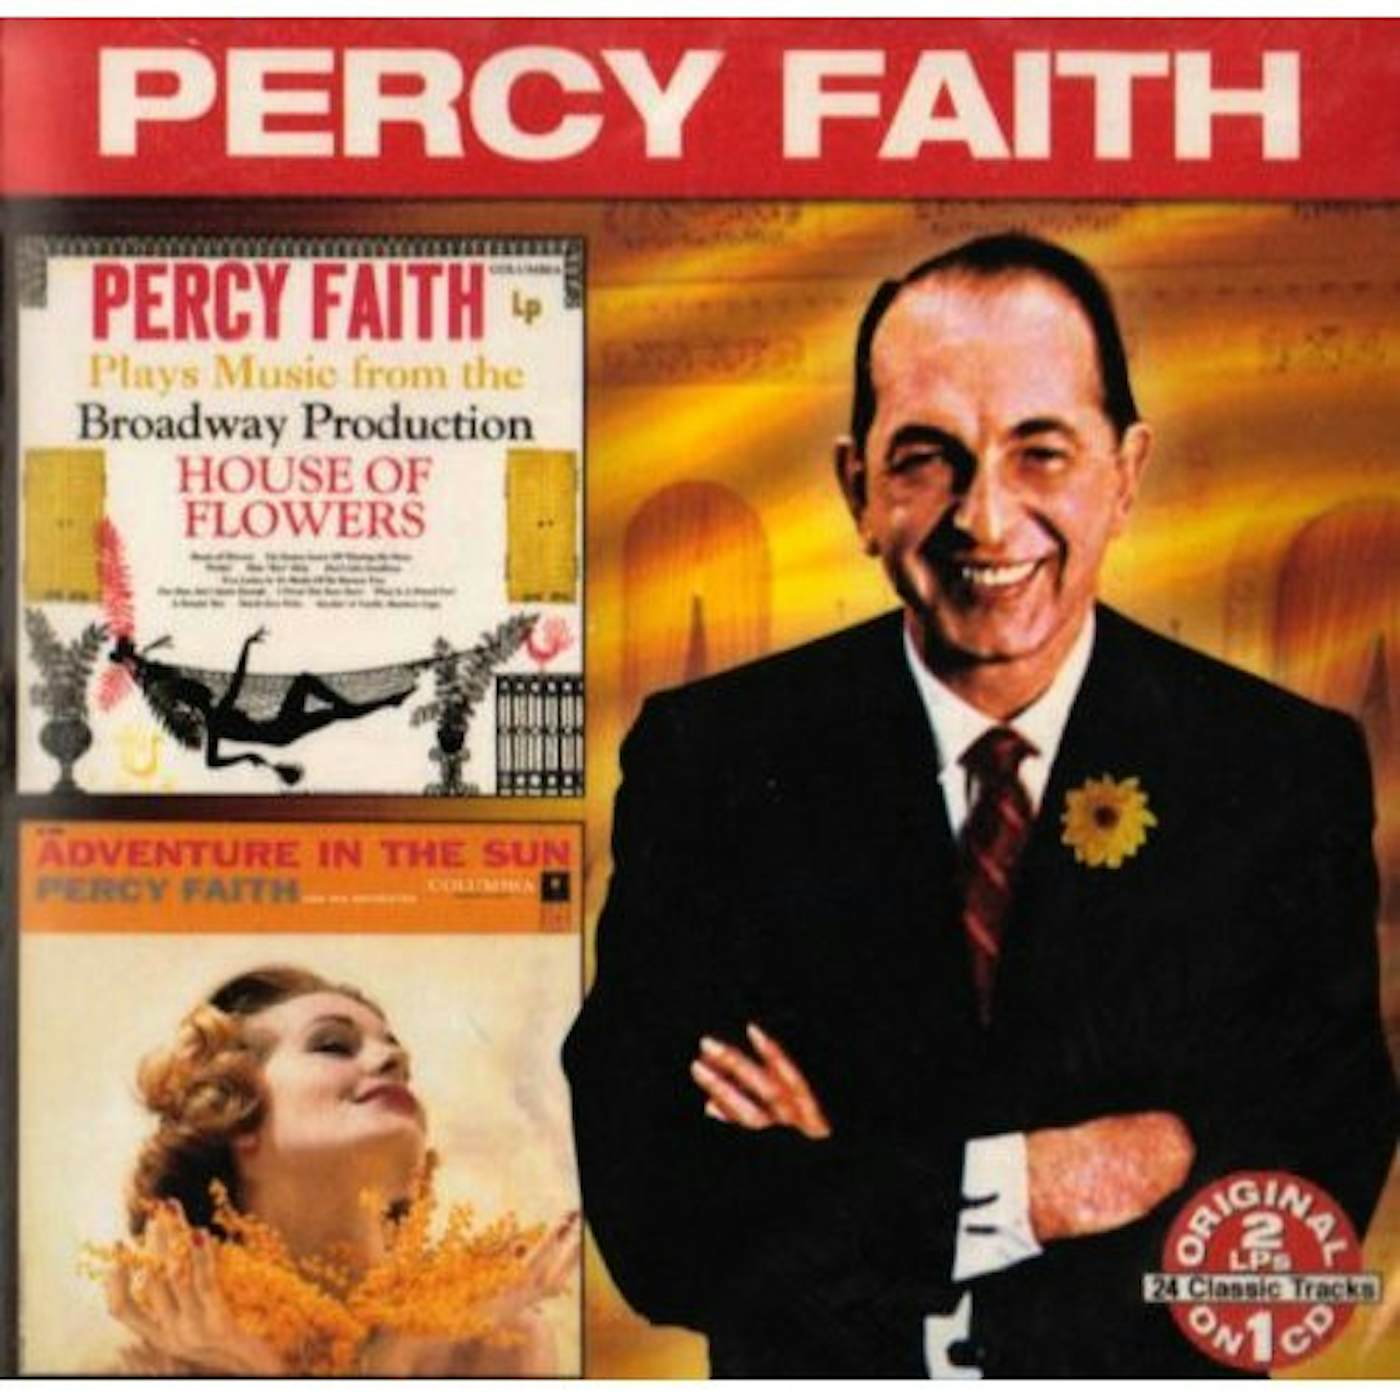 Percy Faith PLAYS MUSIC BROADWAY OF HOUSE FLOWERS: IN THE SUN CD